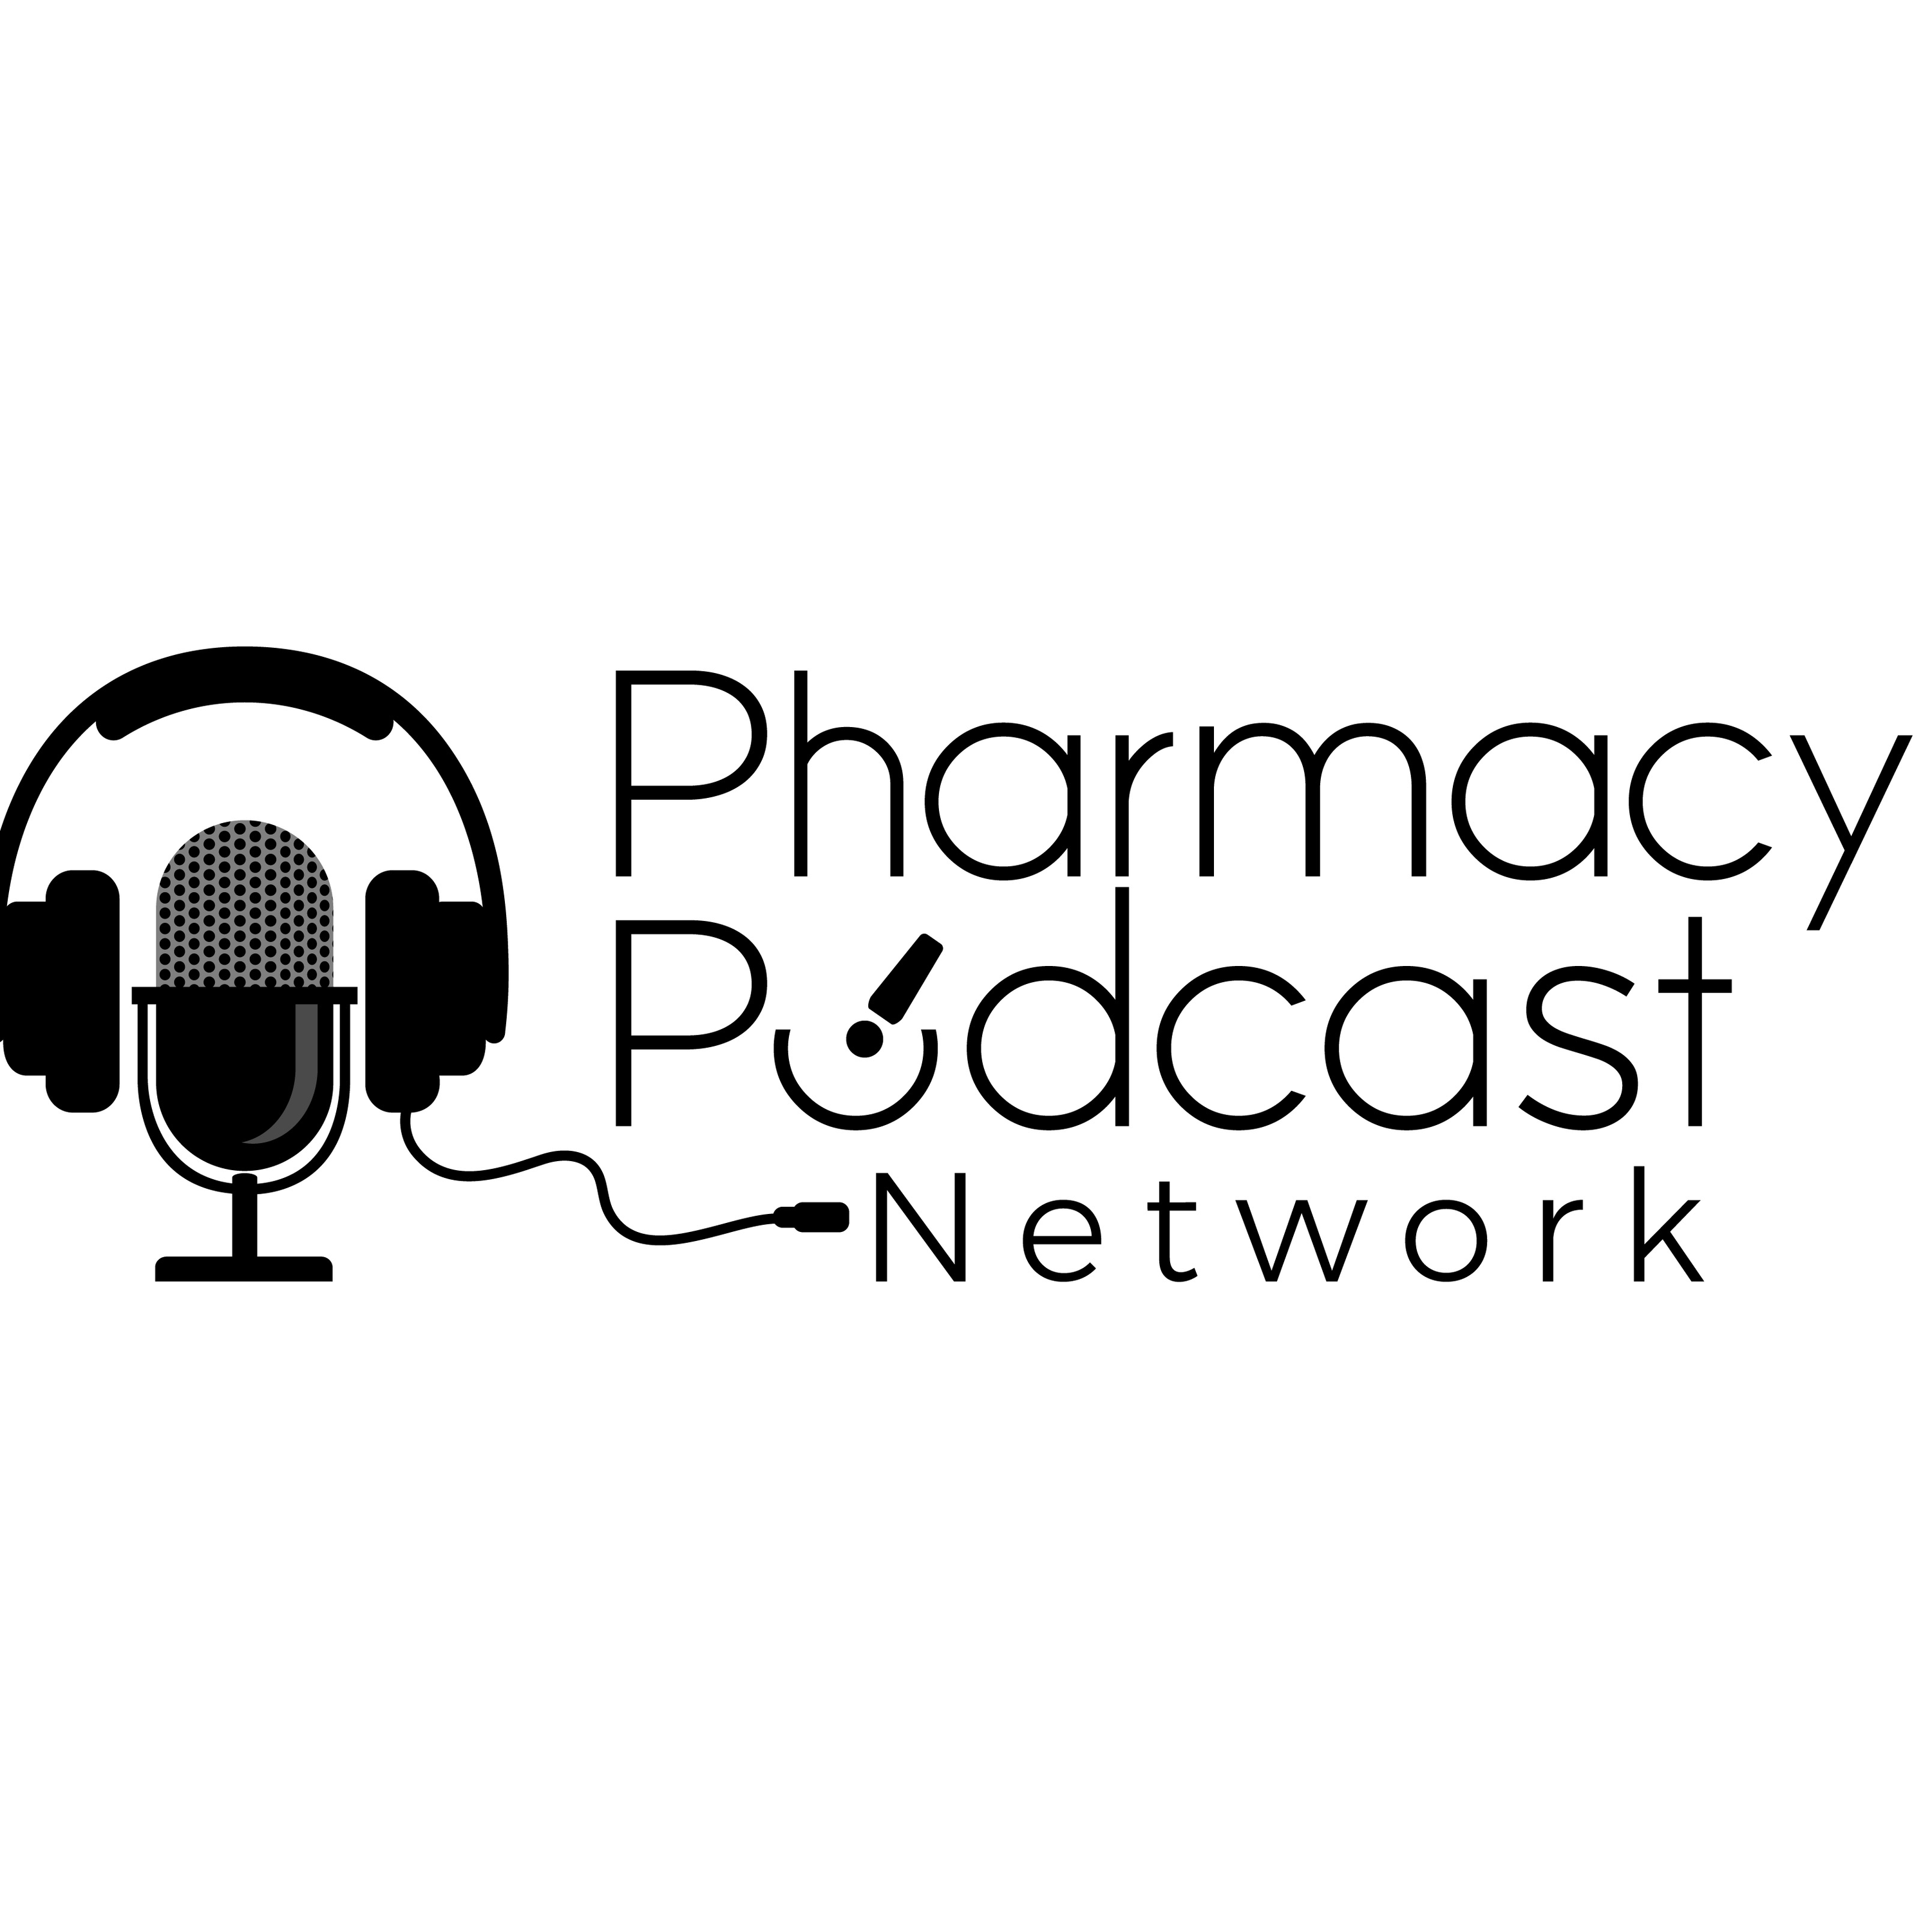 Nuclear Pharmacy: Scientific, Specialized, And Radioactive! - PPN Episode 554